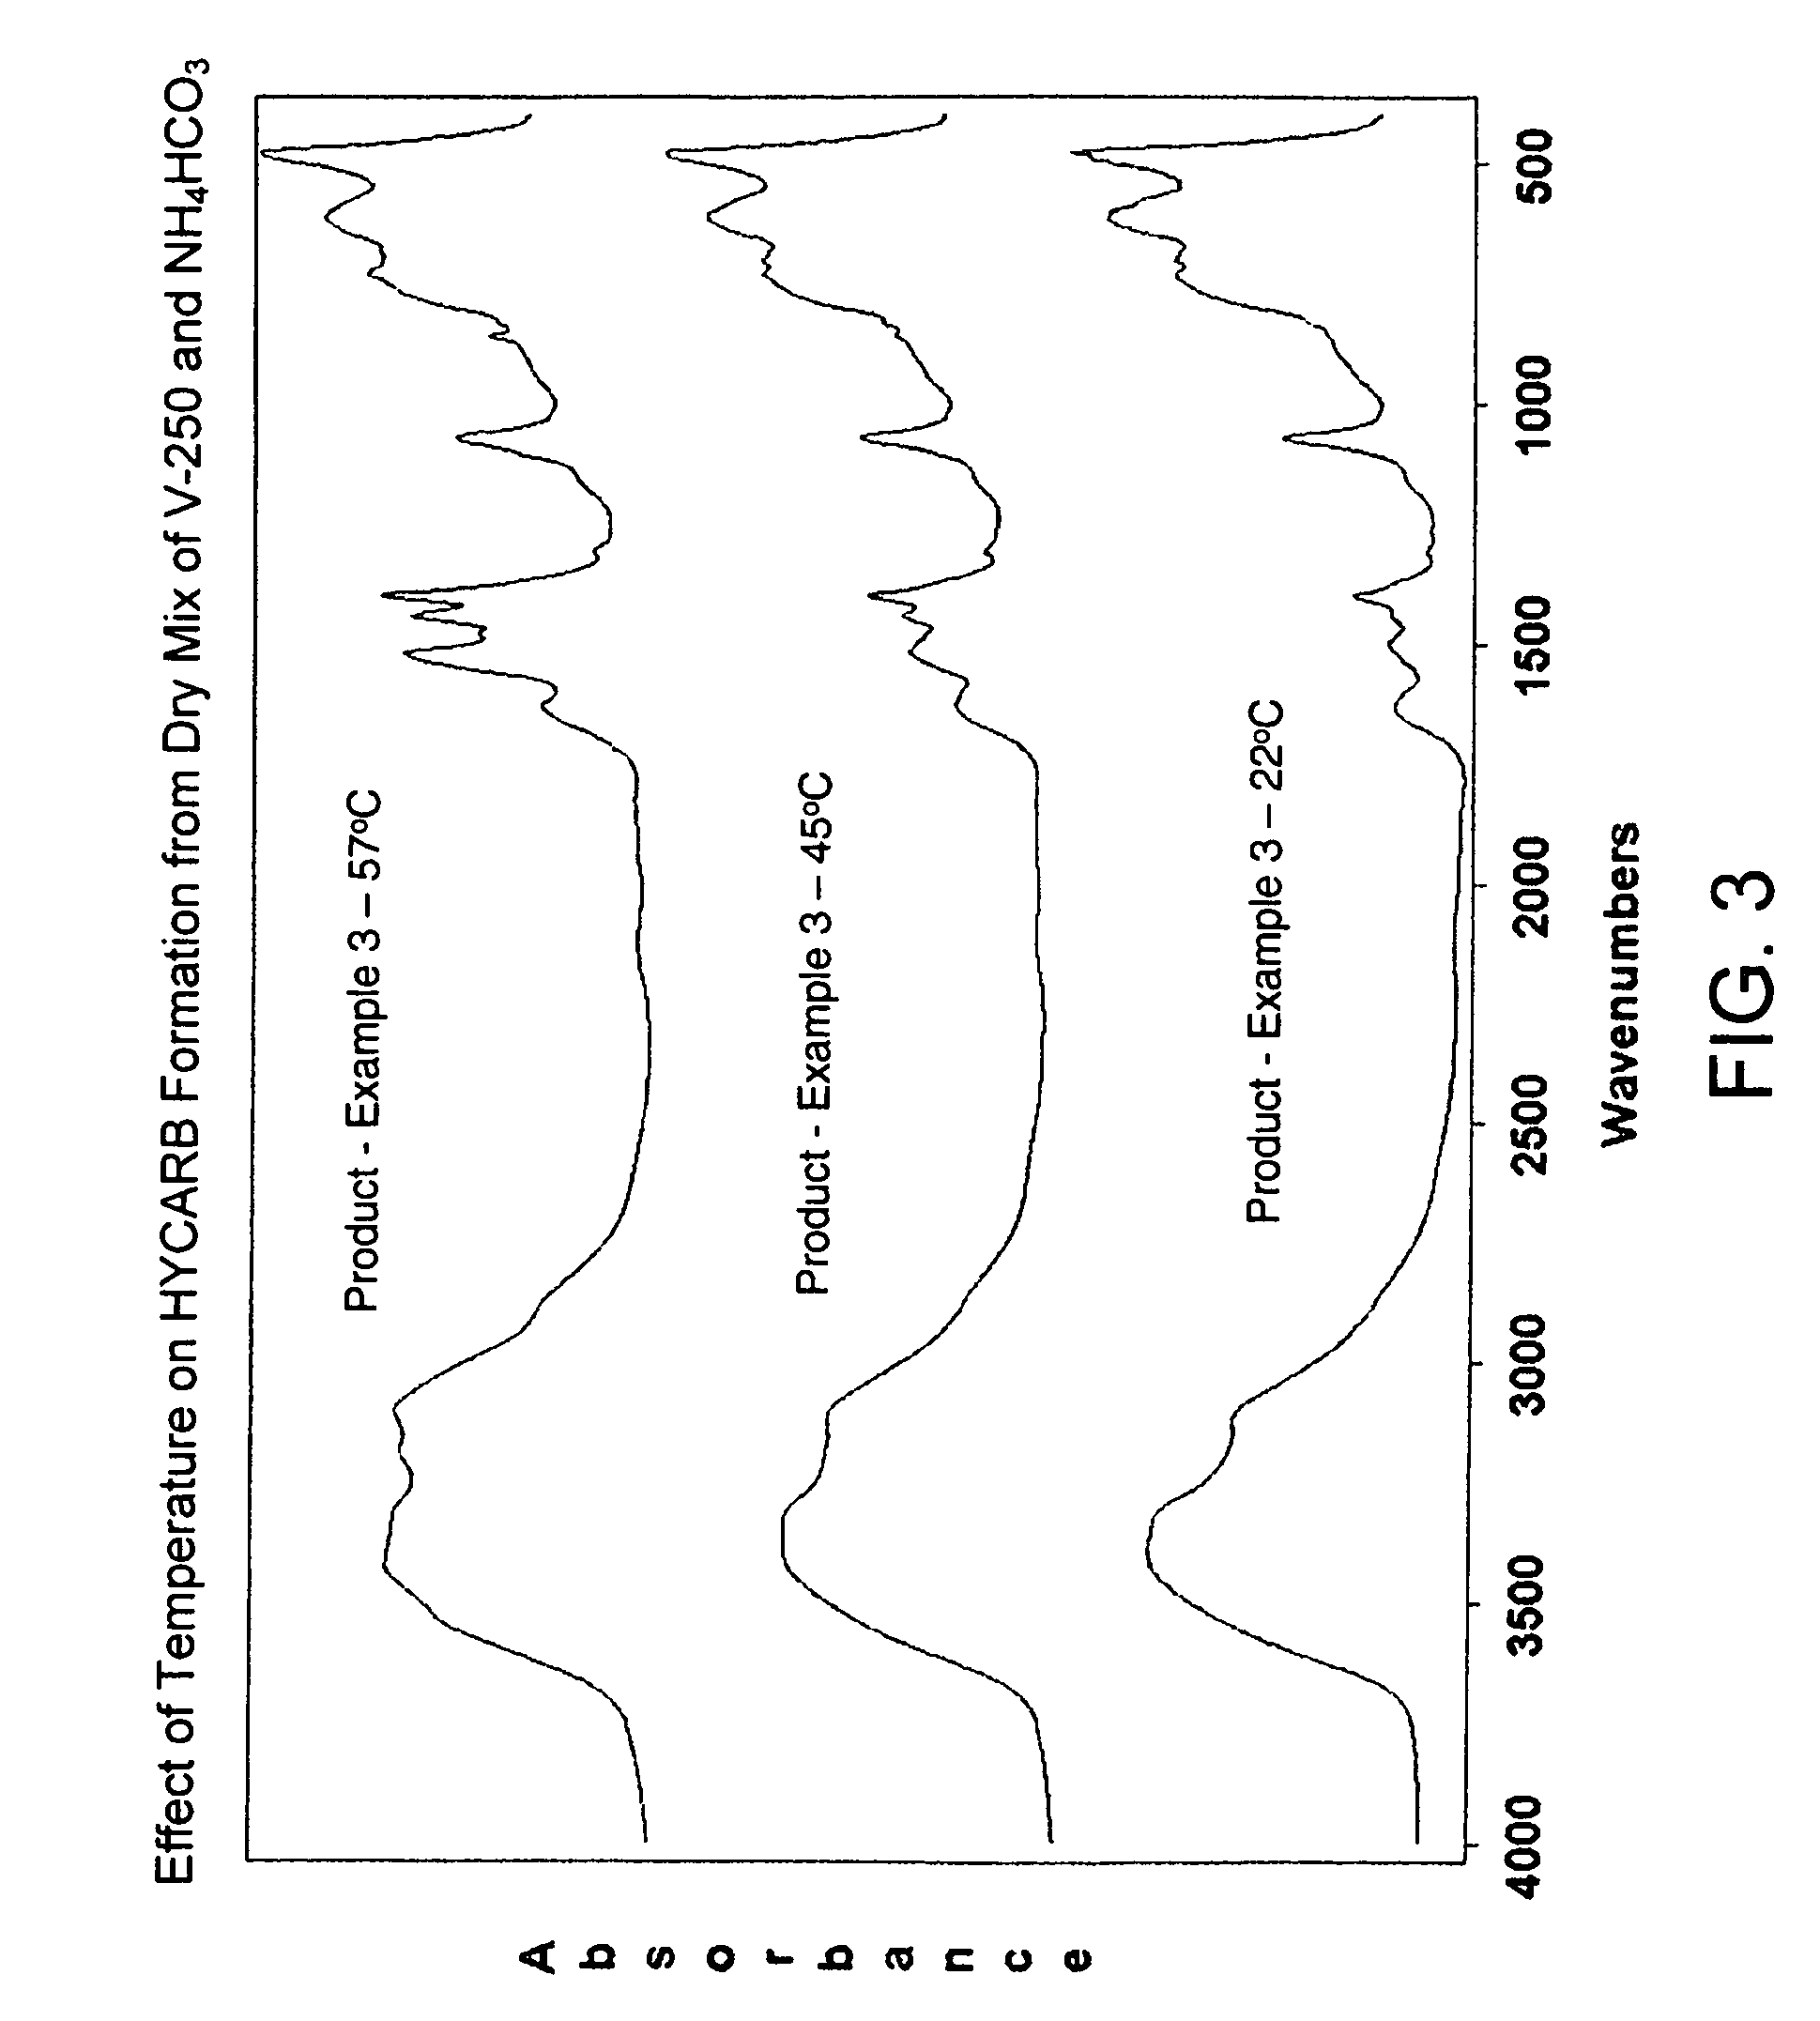 Process for conversion of aluminum oxide hydroxide